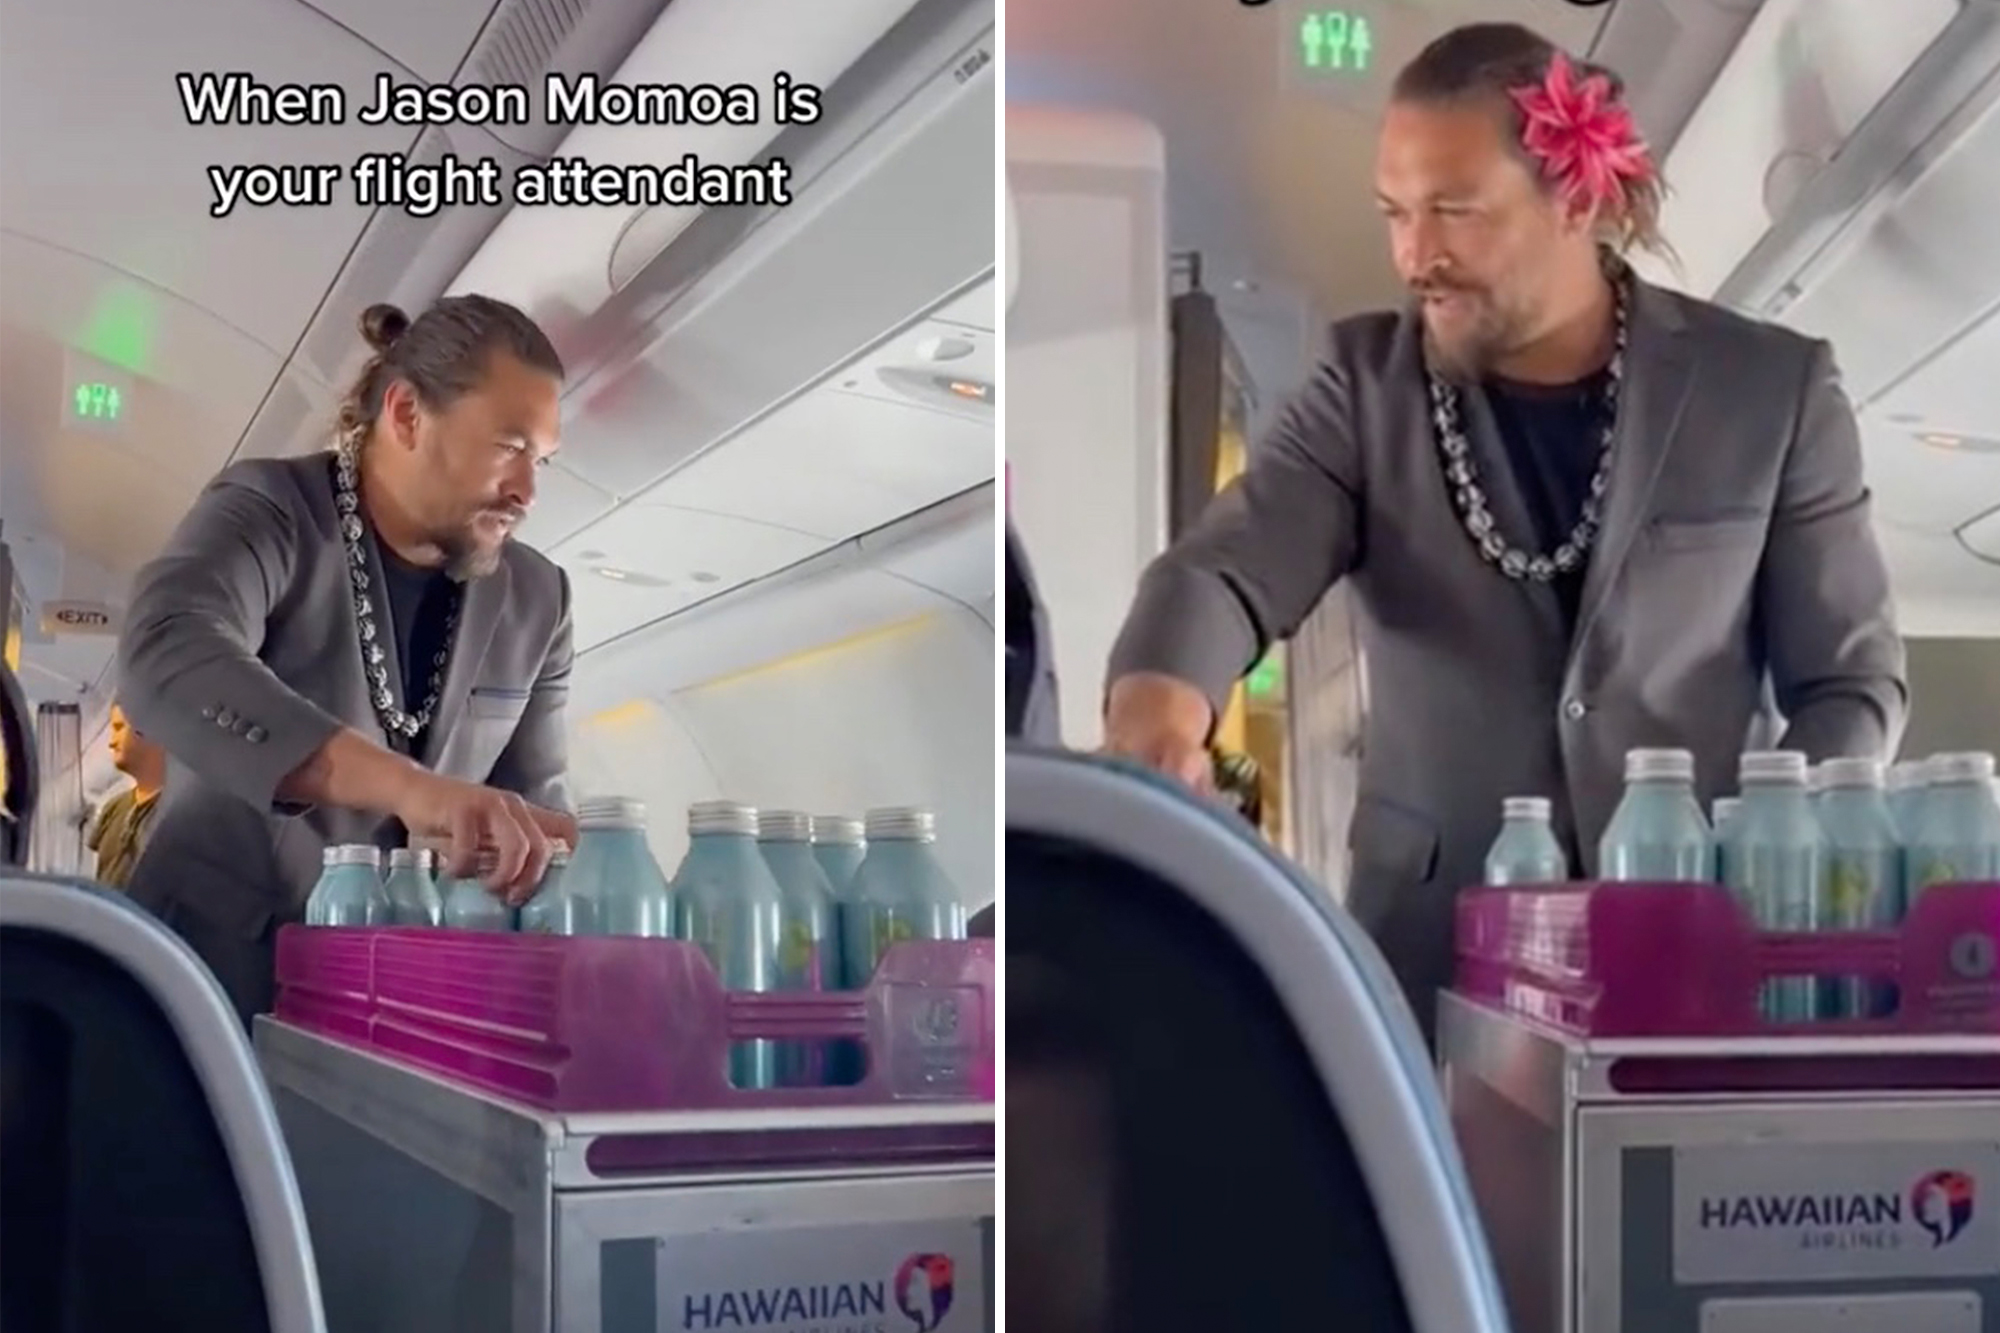 "Aquaman" star Jason Momoa was spotted handing out water as a flight attendant on a Hawaiian Airlines flight in a now-viral video.